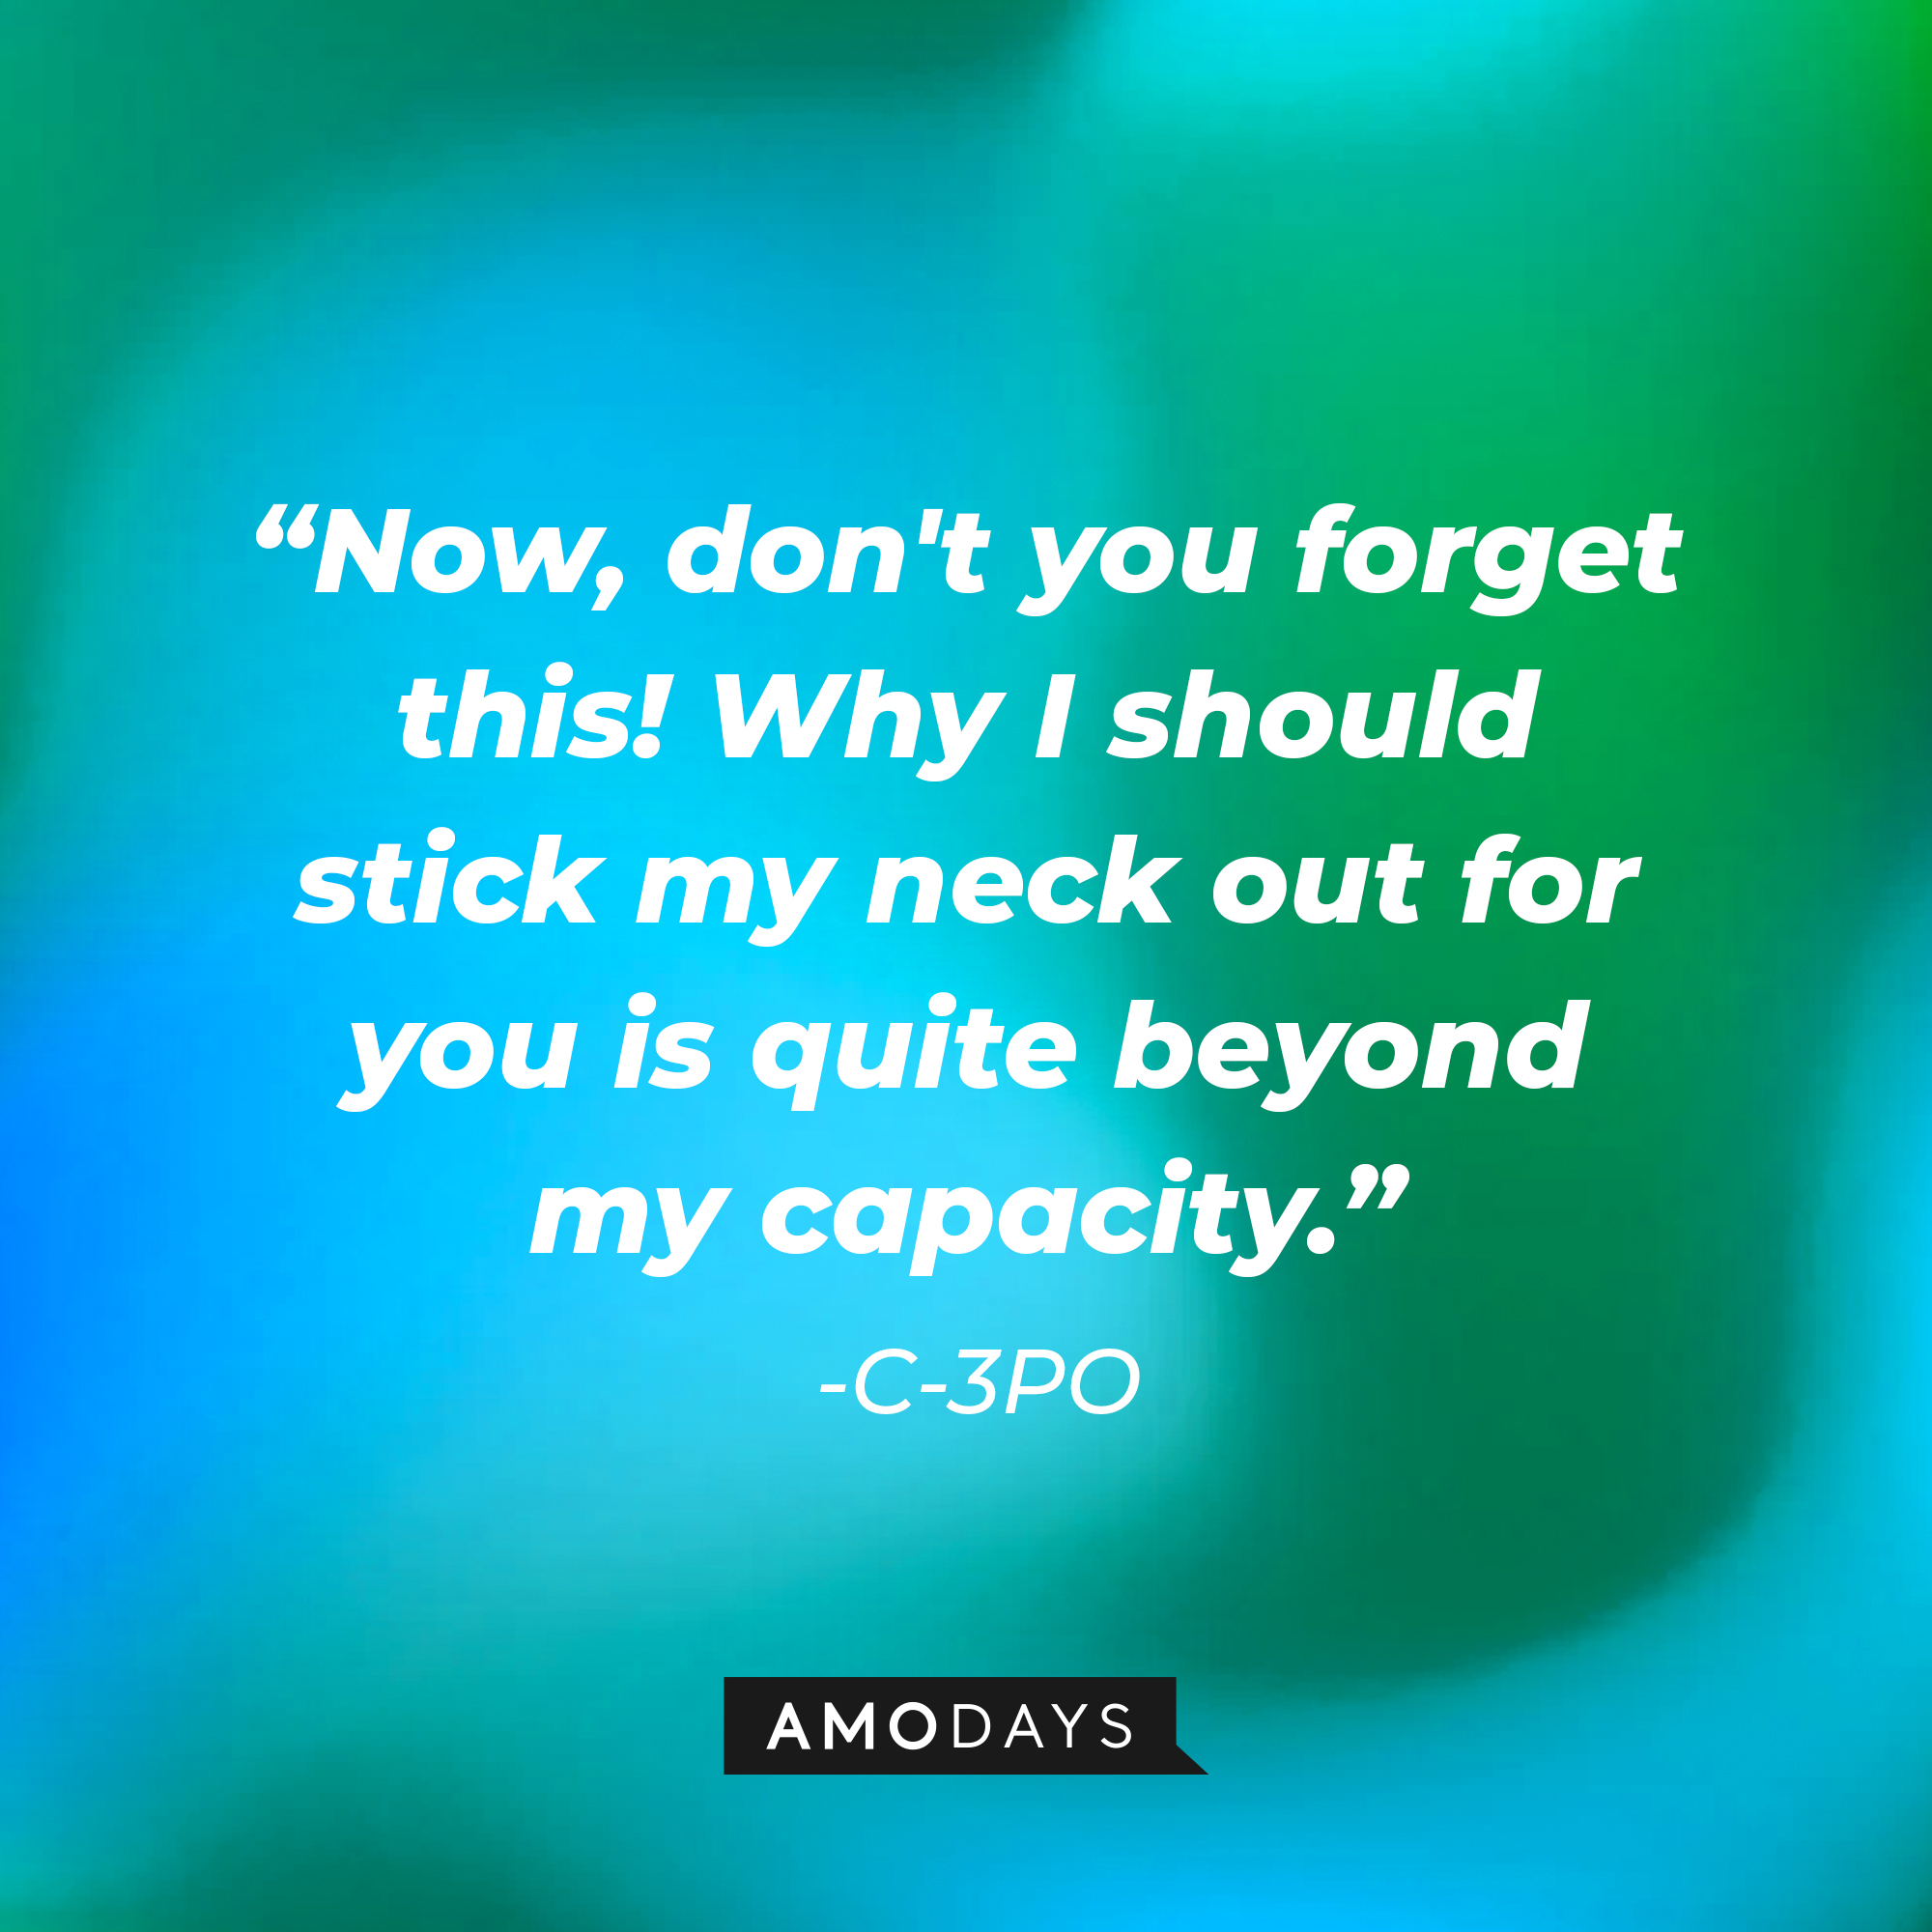 C-3PO's quote: "Now, don't you forget this! Why I should stick my neck out for you is quite beyond my capacity." | Source: AmoDays